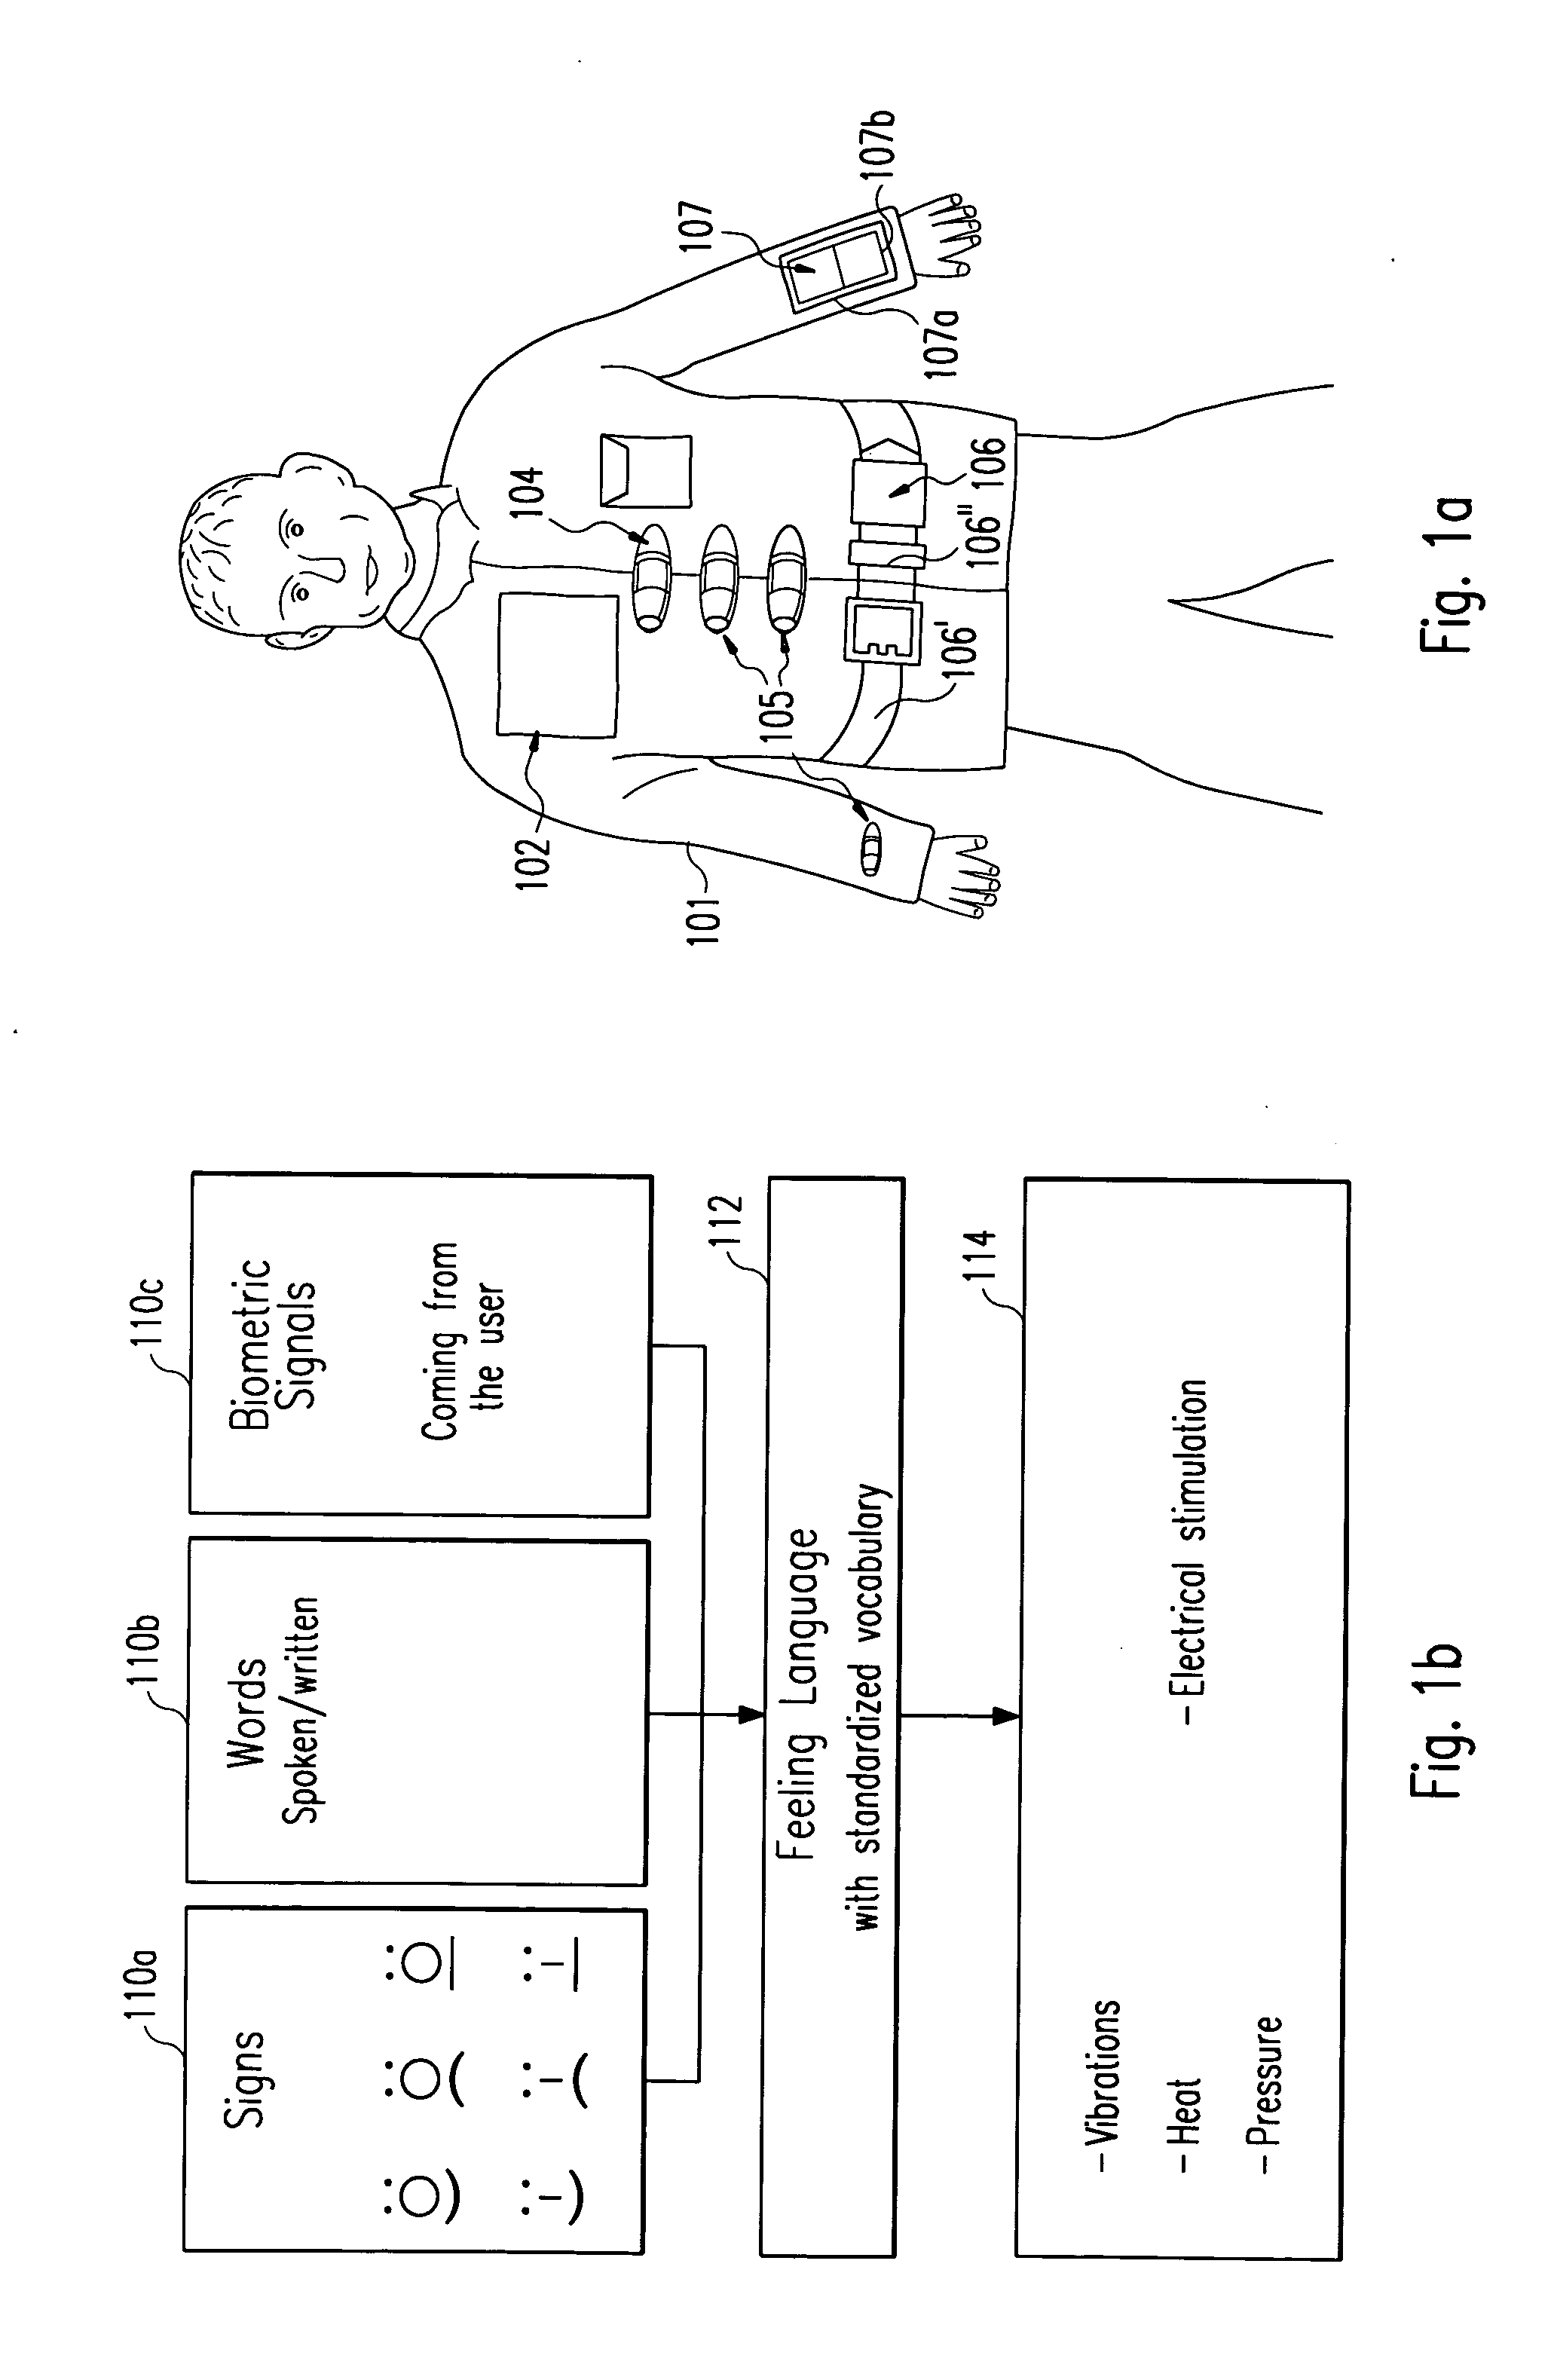 Transmitting information to a user's body